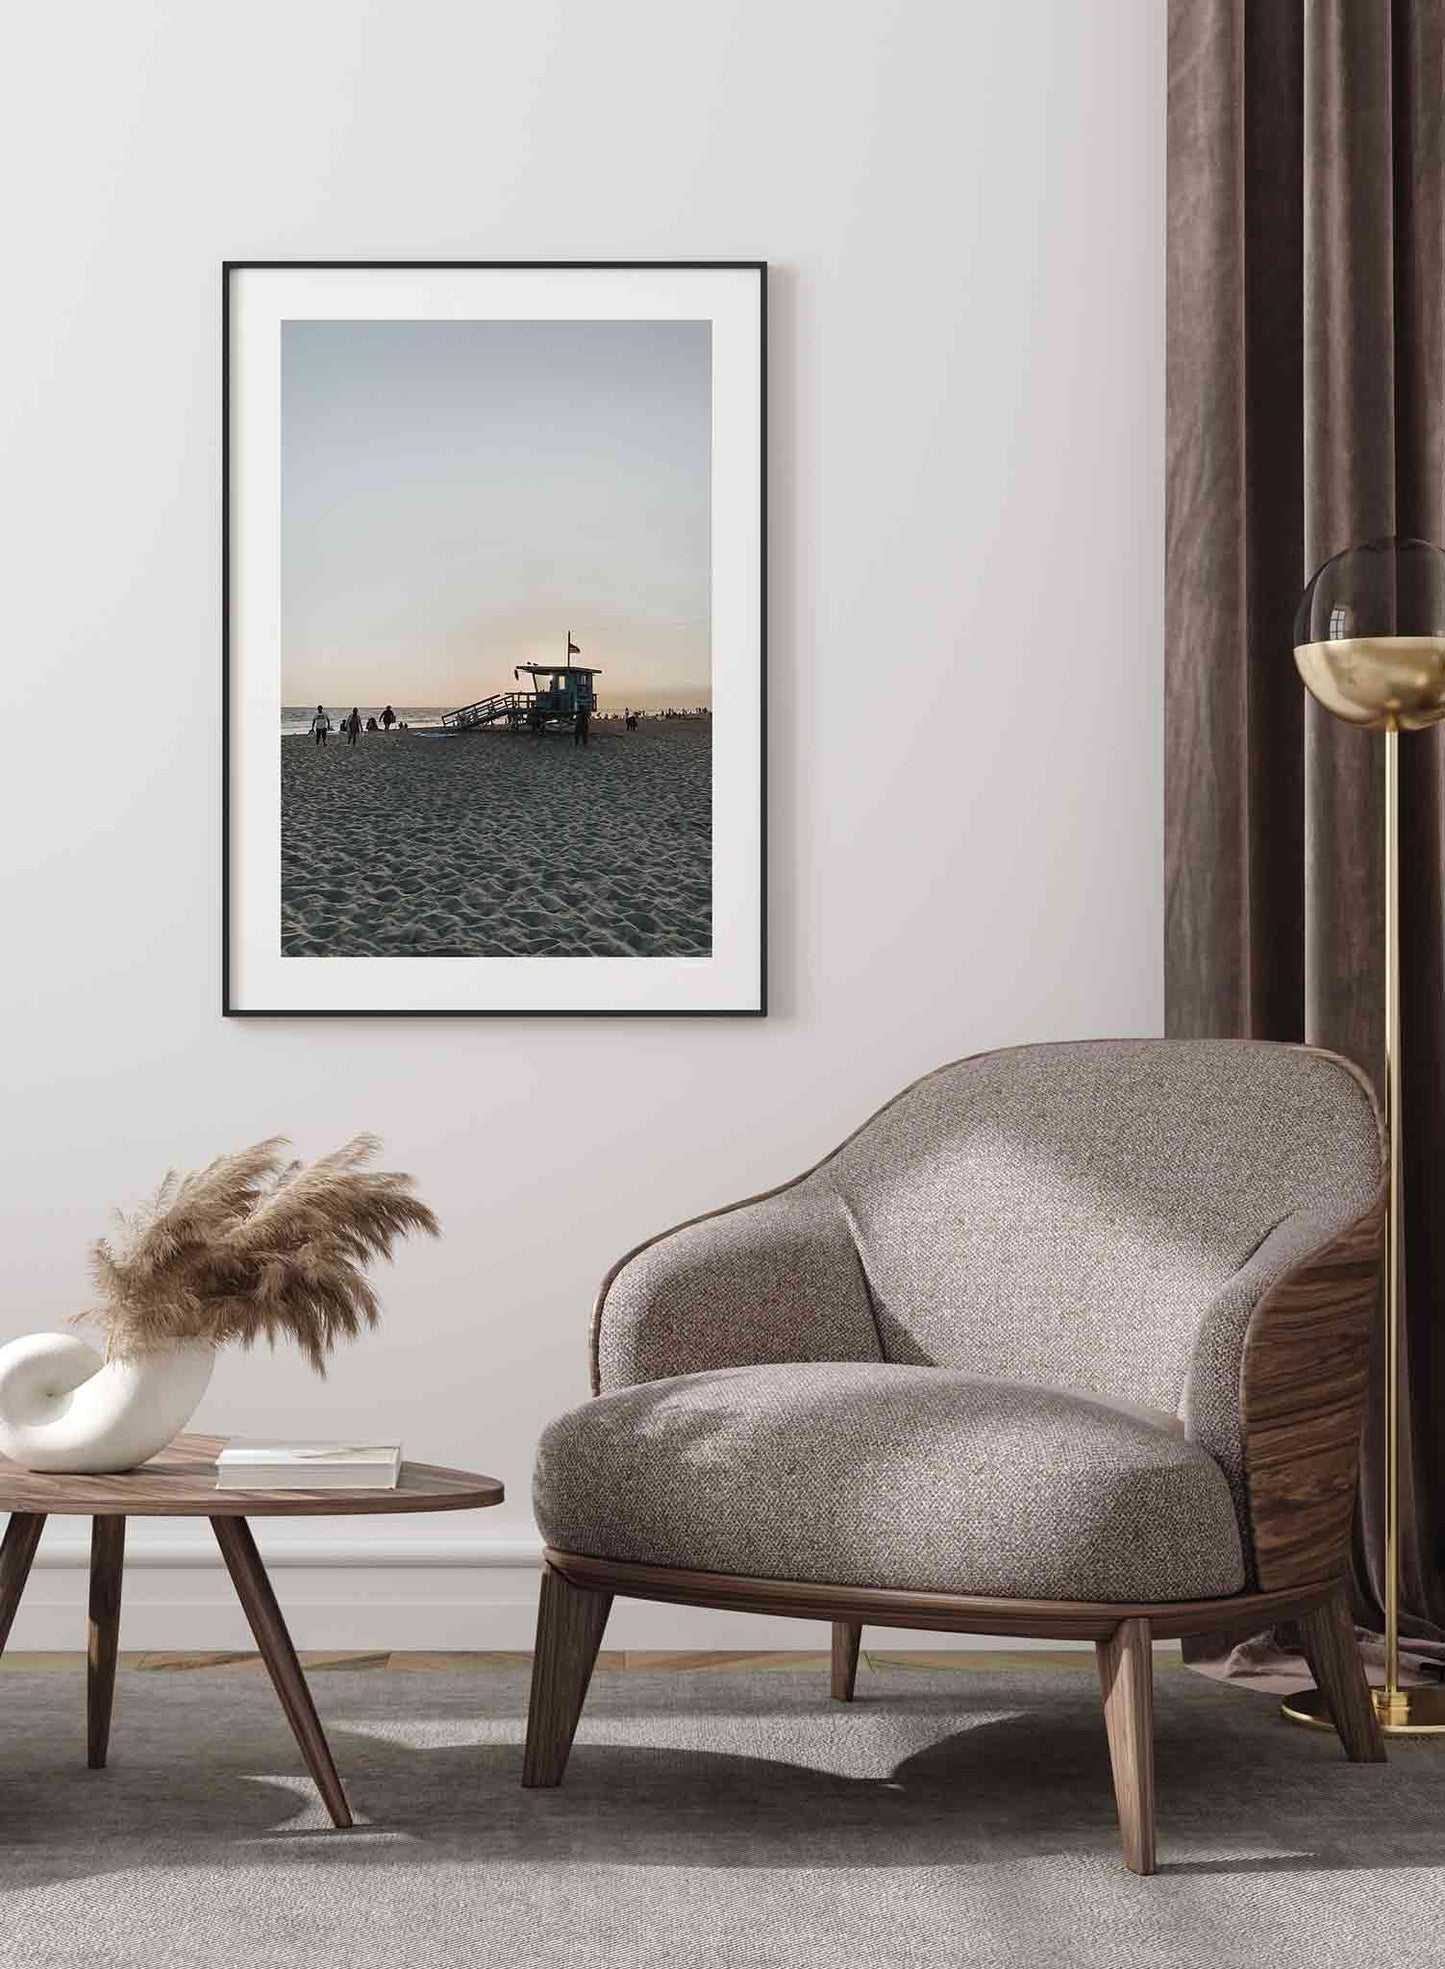 Beach Exit is a summer photography poster of a sandy beach at dusk featuring a lifeguard tower by Opposite Wall.